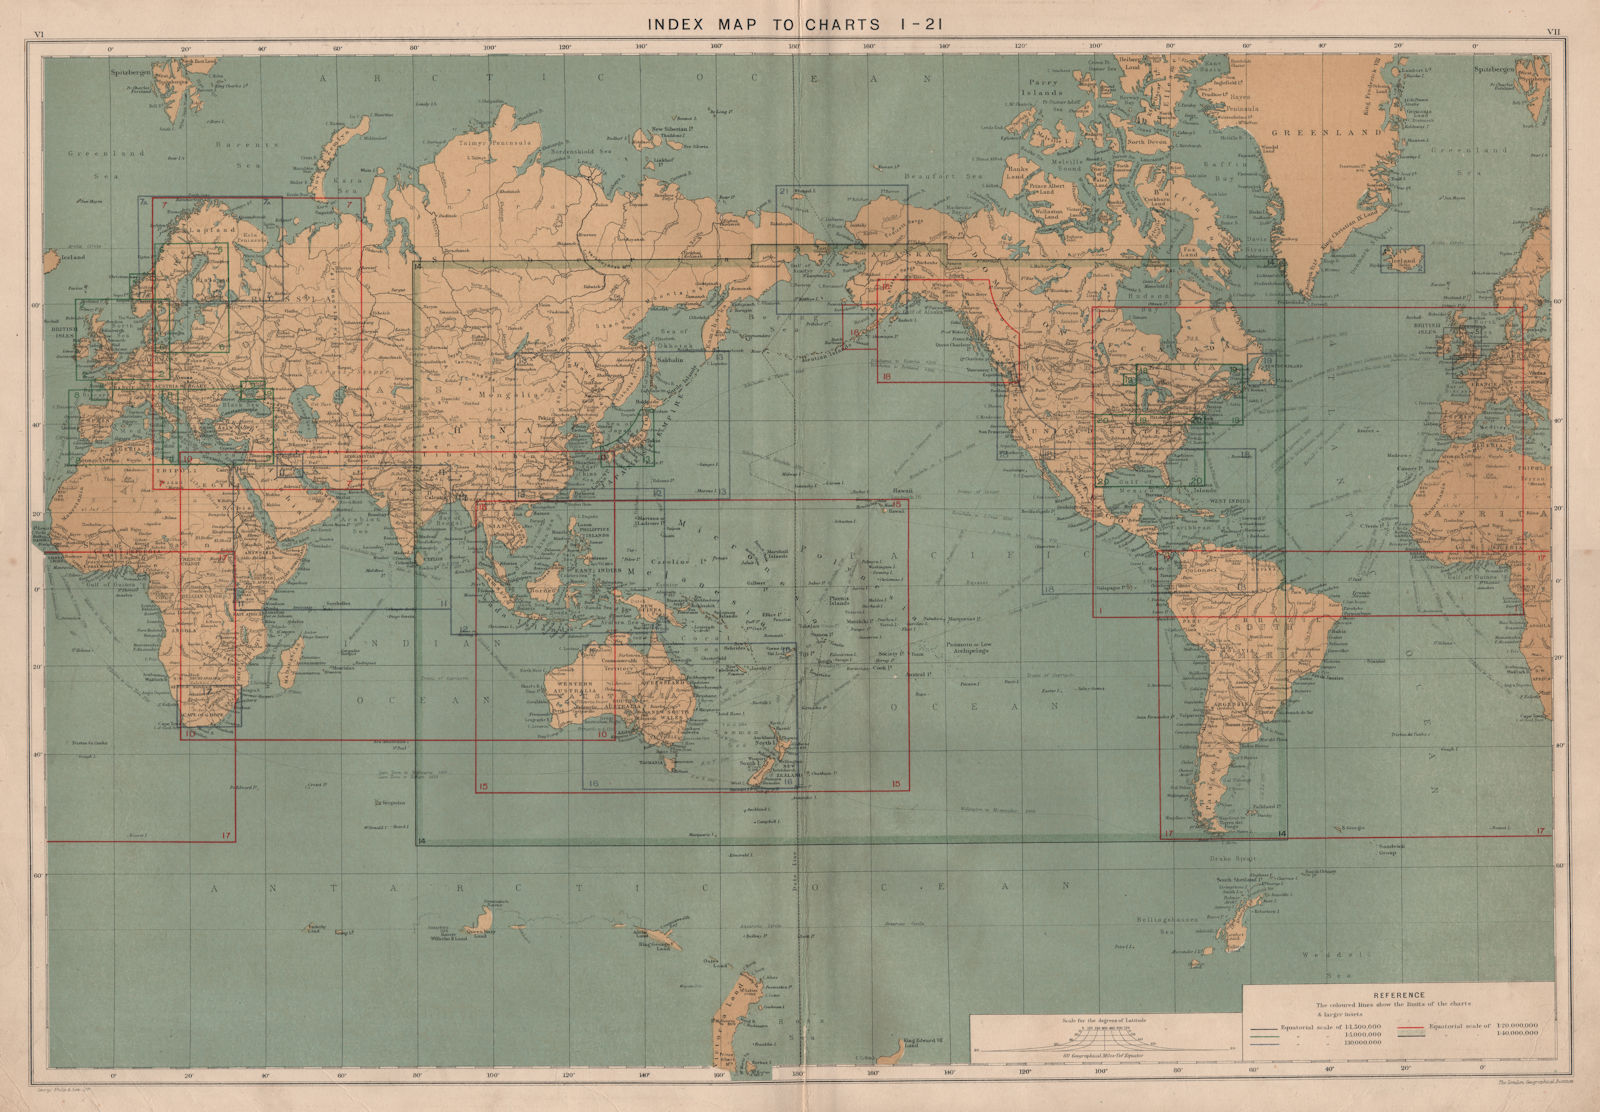 Associate Product WORLD. Index Map To Charts 1-21. World. Large 50x70cm 1918 old antique